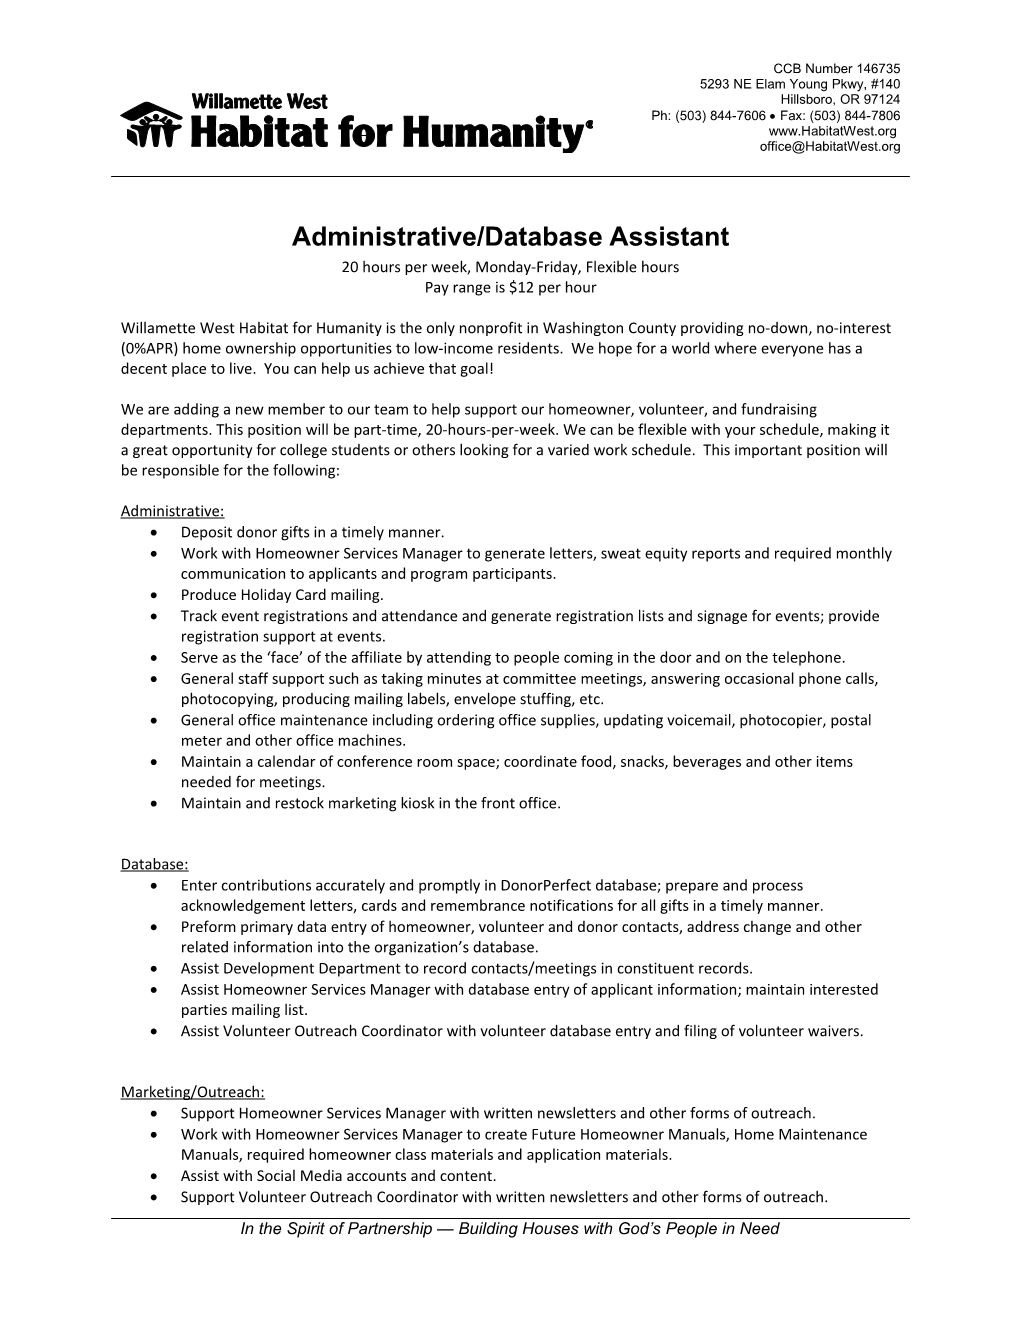 Administrative/Database Assistant